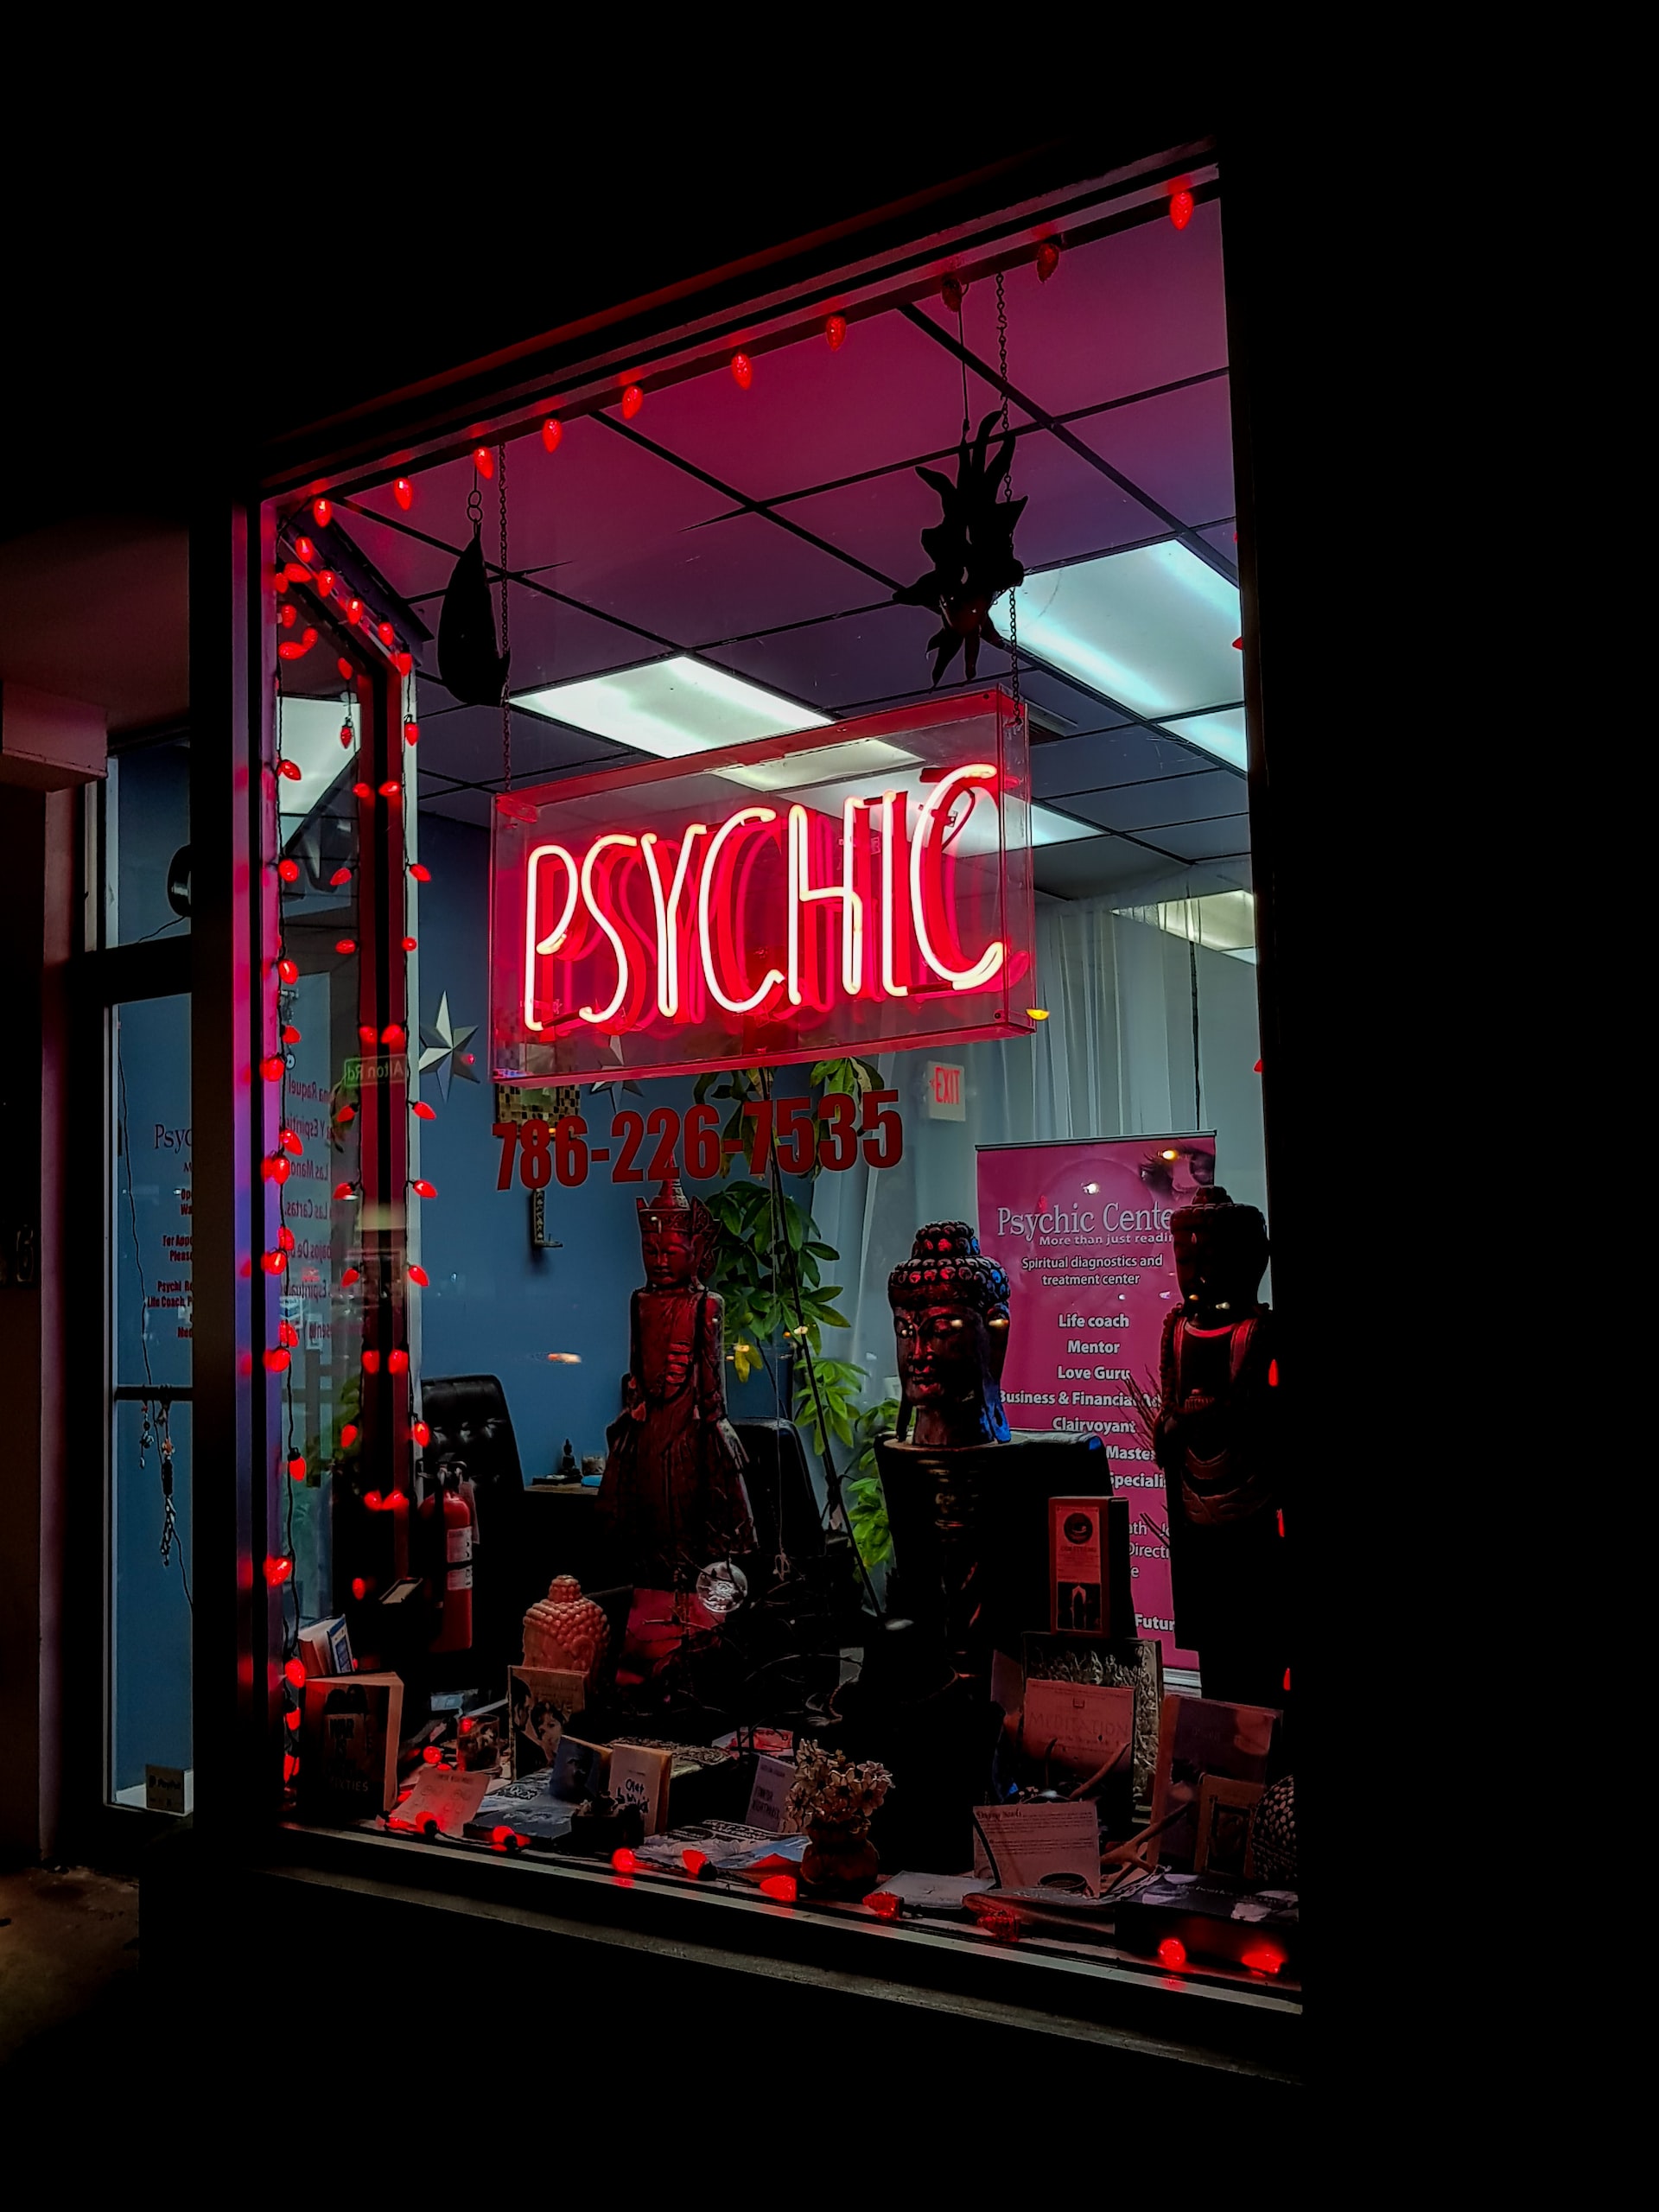 Scientific And Spiritual Implications Of Psychic Abilities - Why People Believe In Psychic Powers